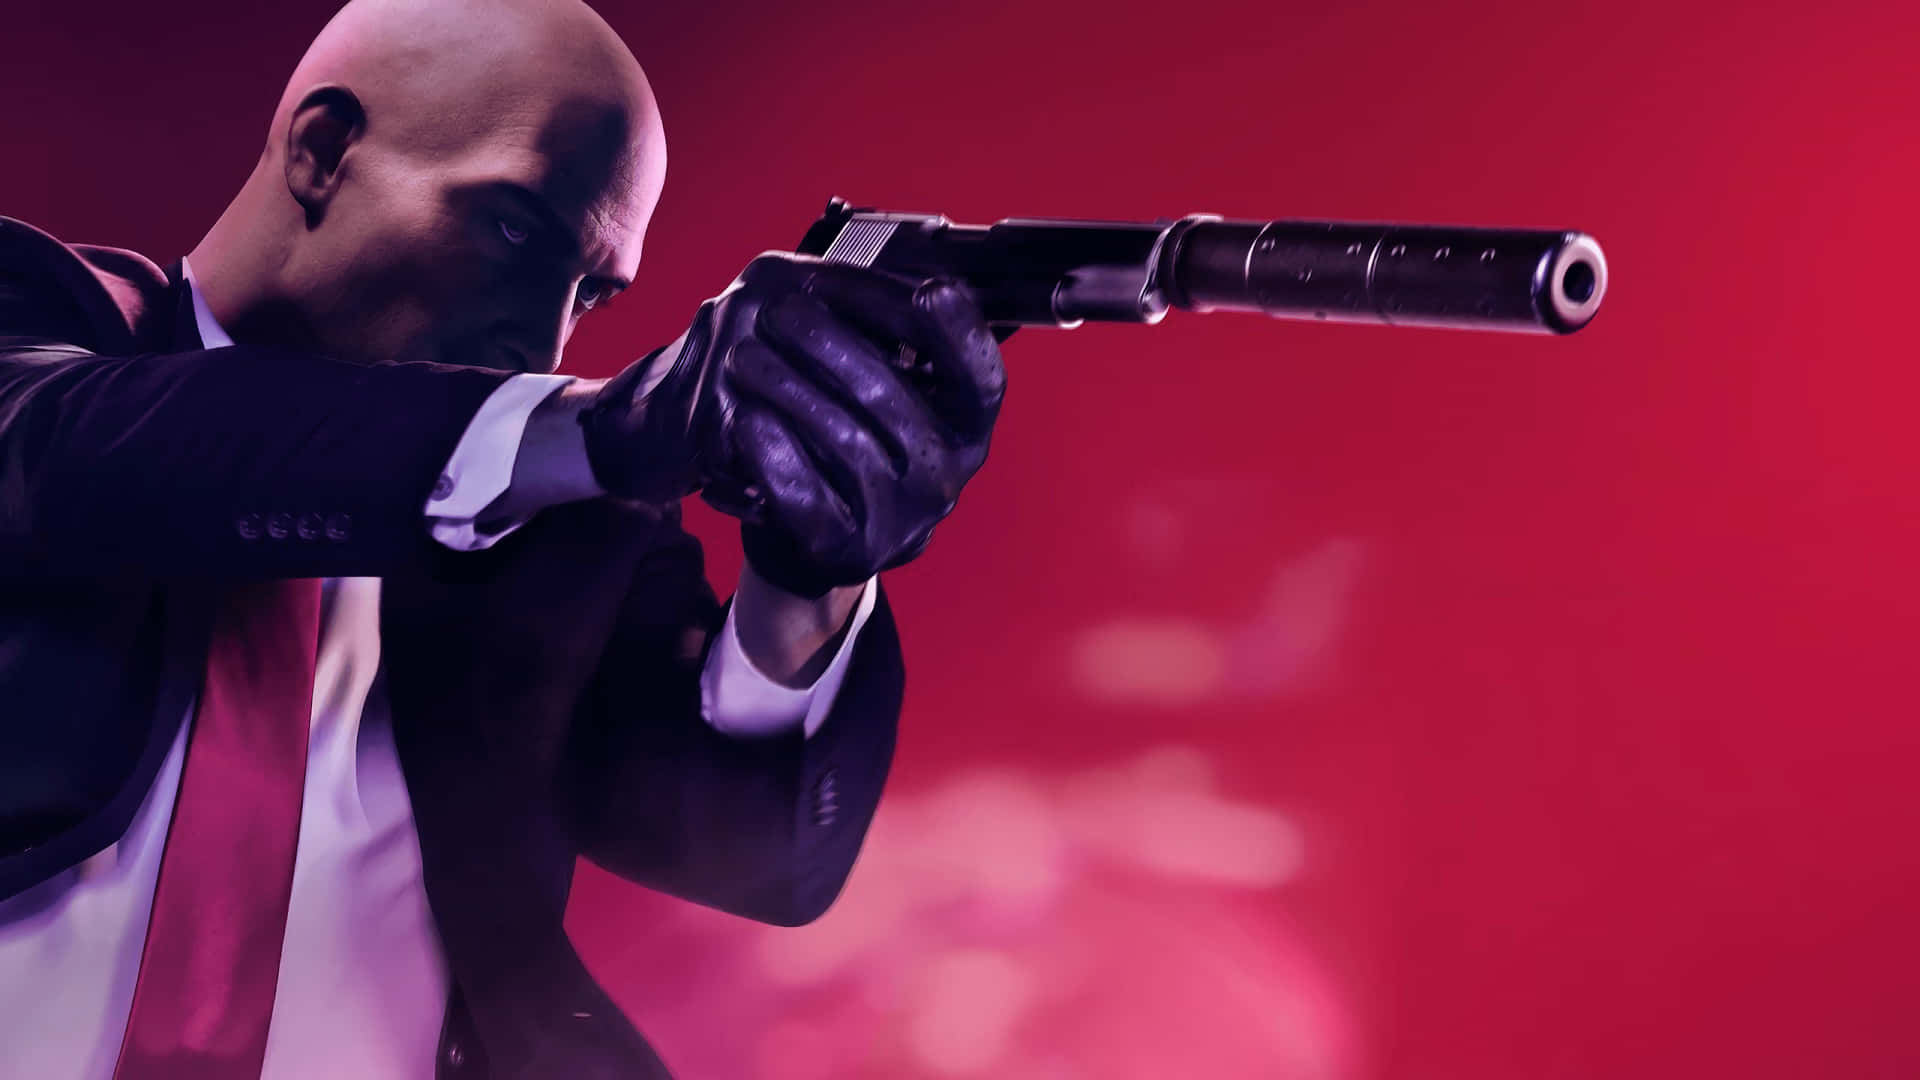 Join Agent 47 on his latest and most thrilling hit yet. Wallpaper